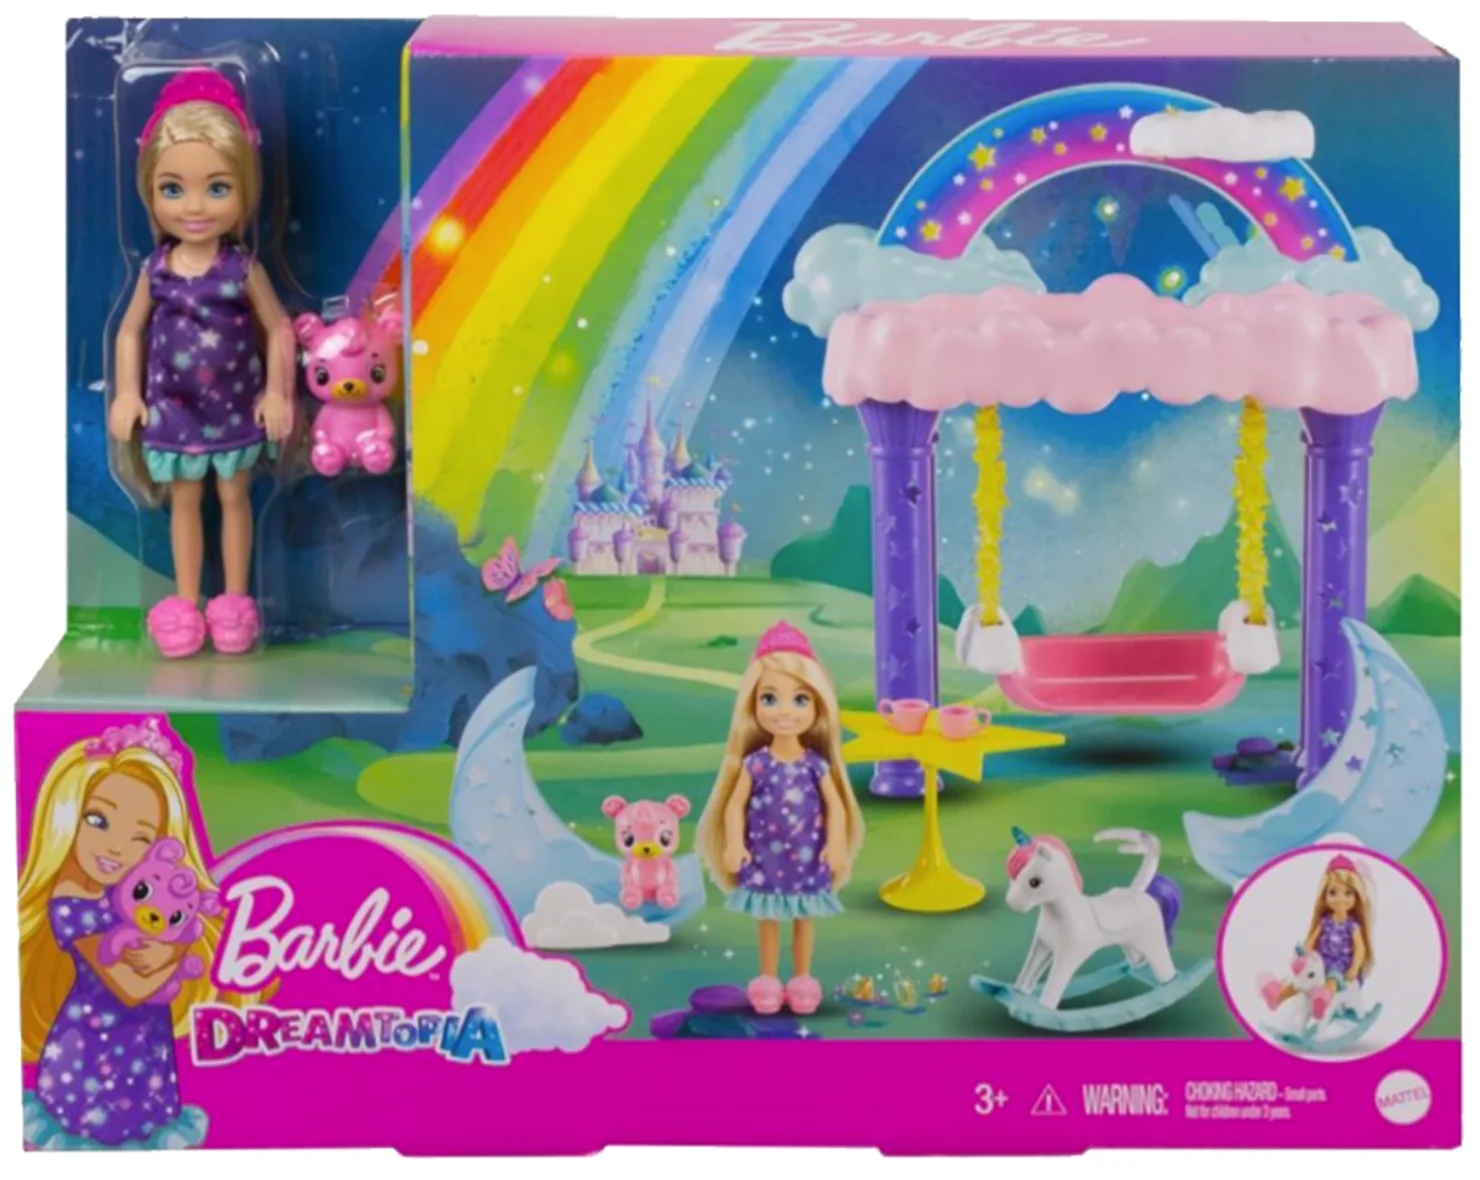 

Barbie Dreamtopia Chelsea Princess Doll & Fairytale Sleepover Playset with Loft Bed, Swing, Moon Chairs & Unicorn Rocking